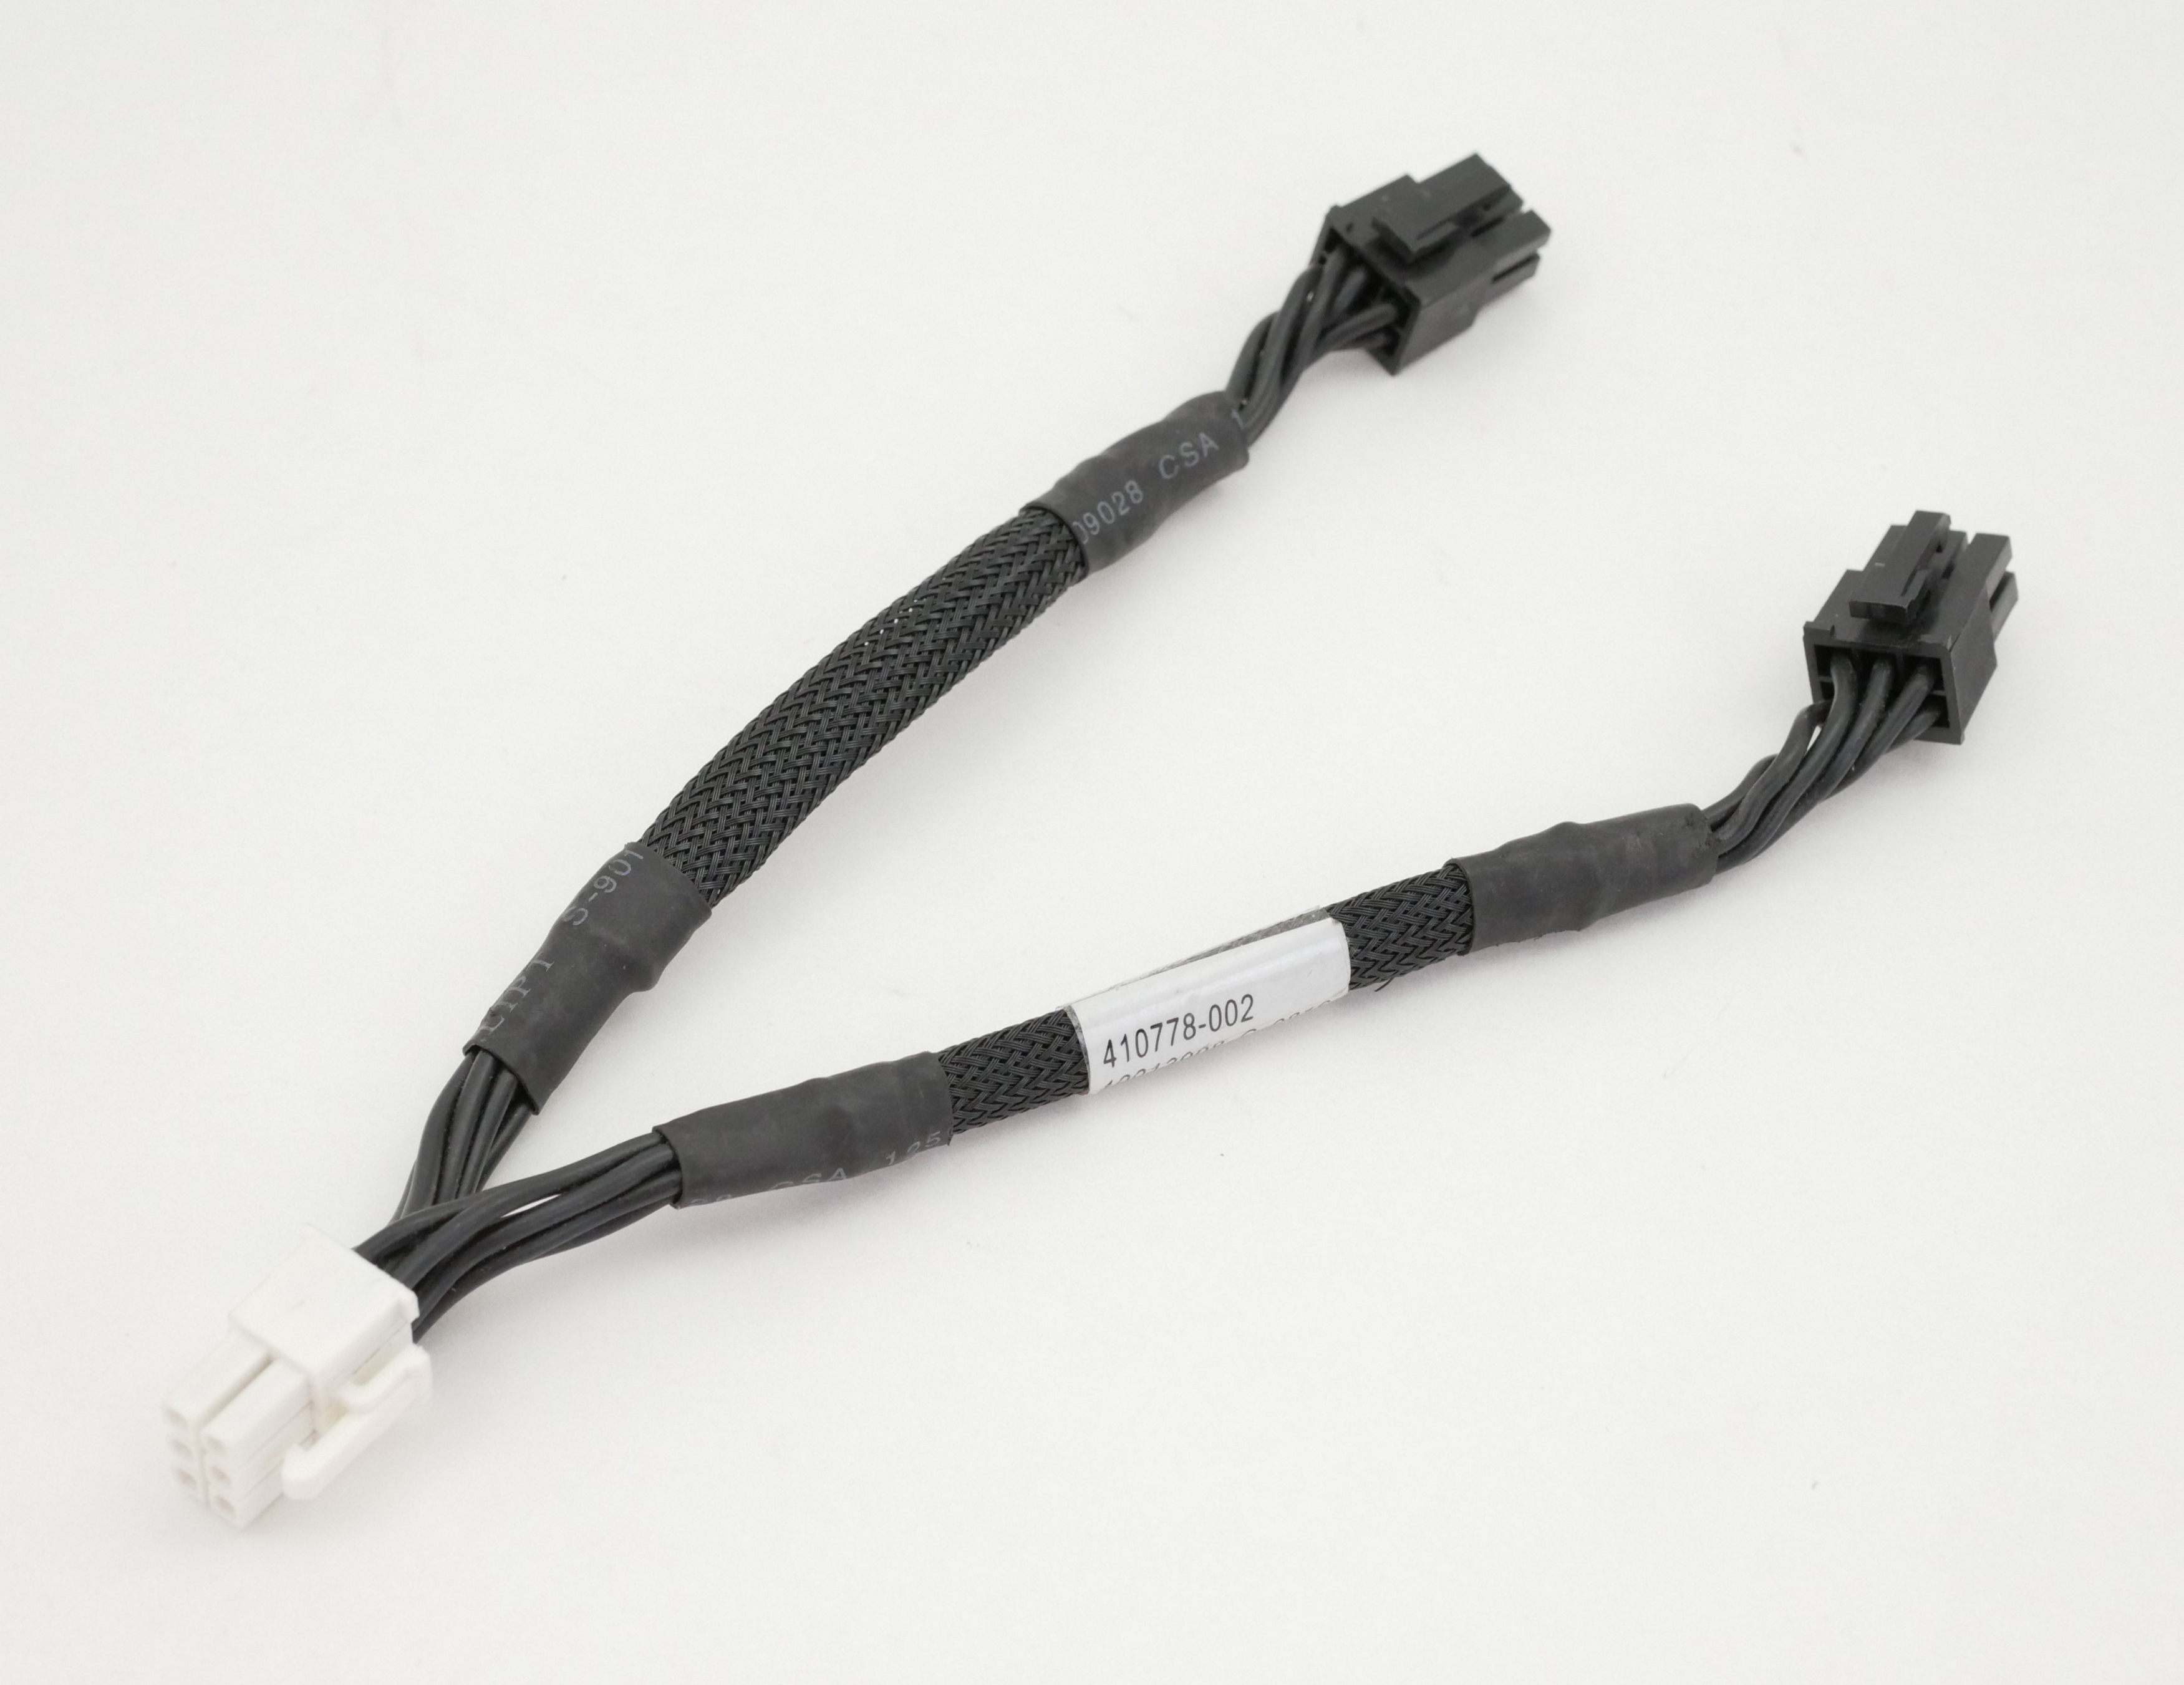 HP PCI Power Cable Y 6" 6pin to dual 6pin 410778-002